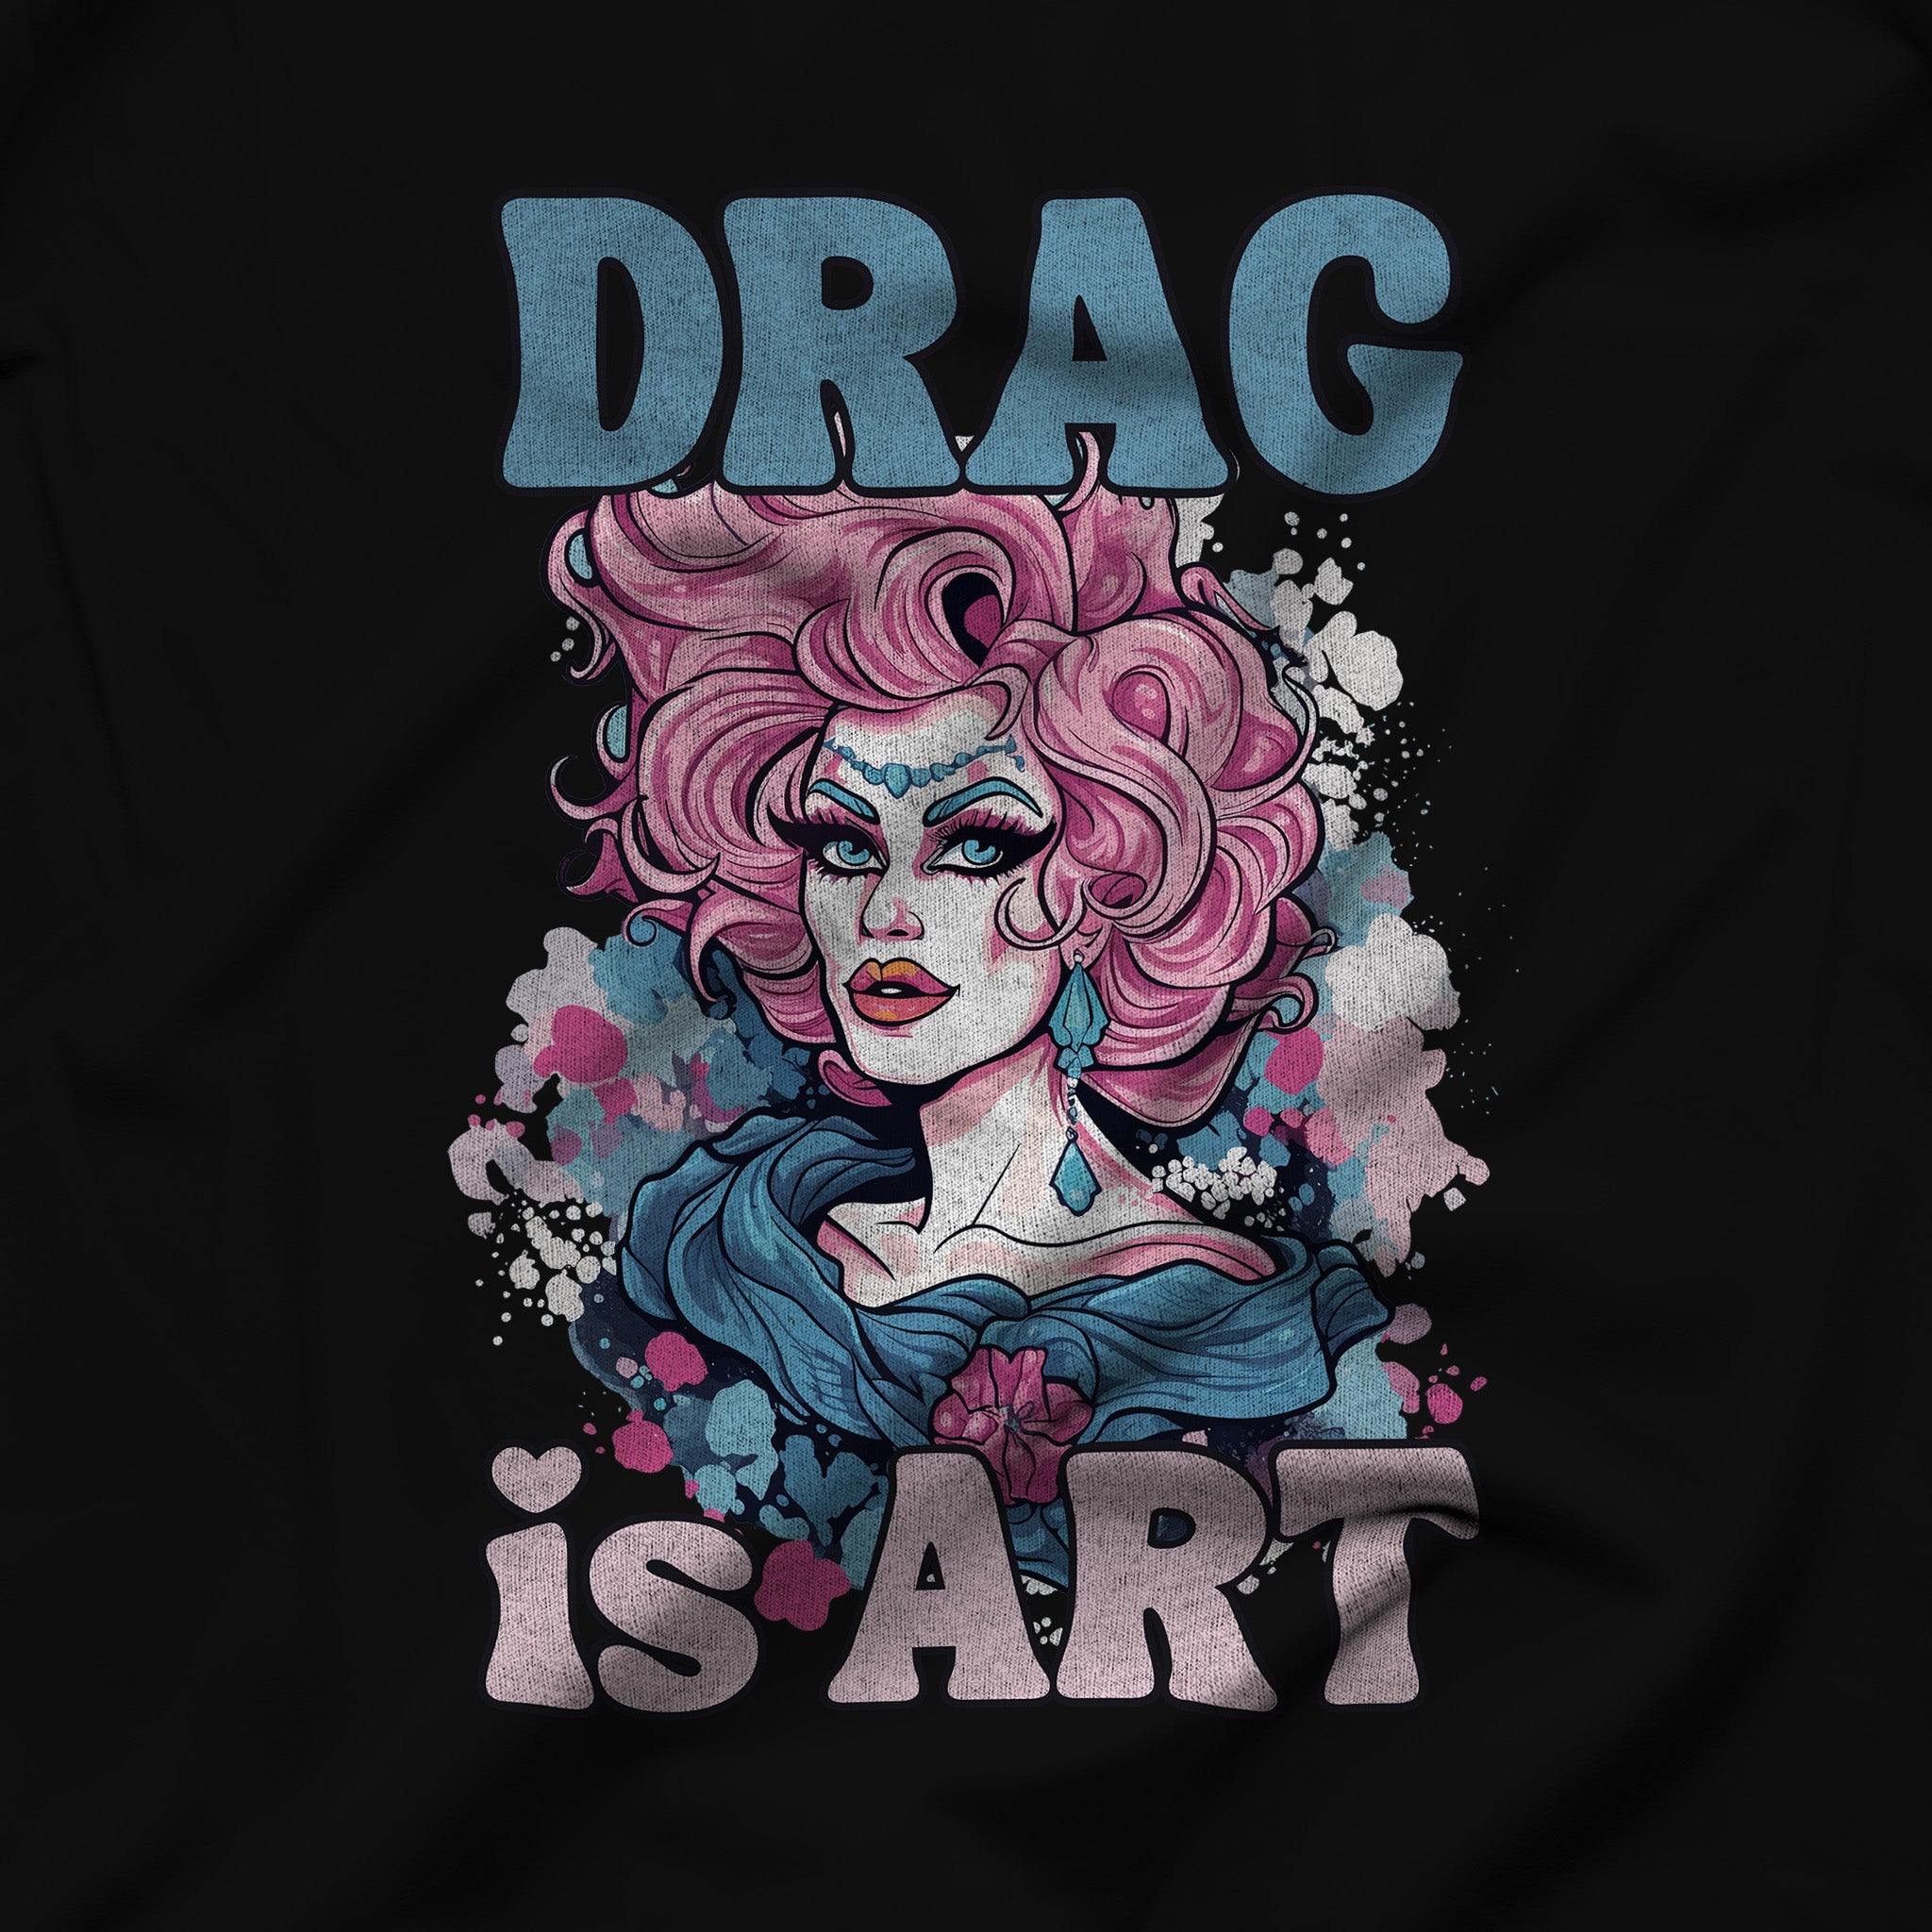 Drag is ART - Protest the Drag Ban T-Shirt - Hunky Tops#color_black